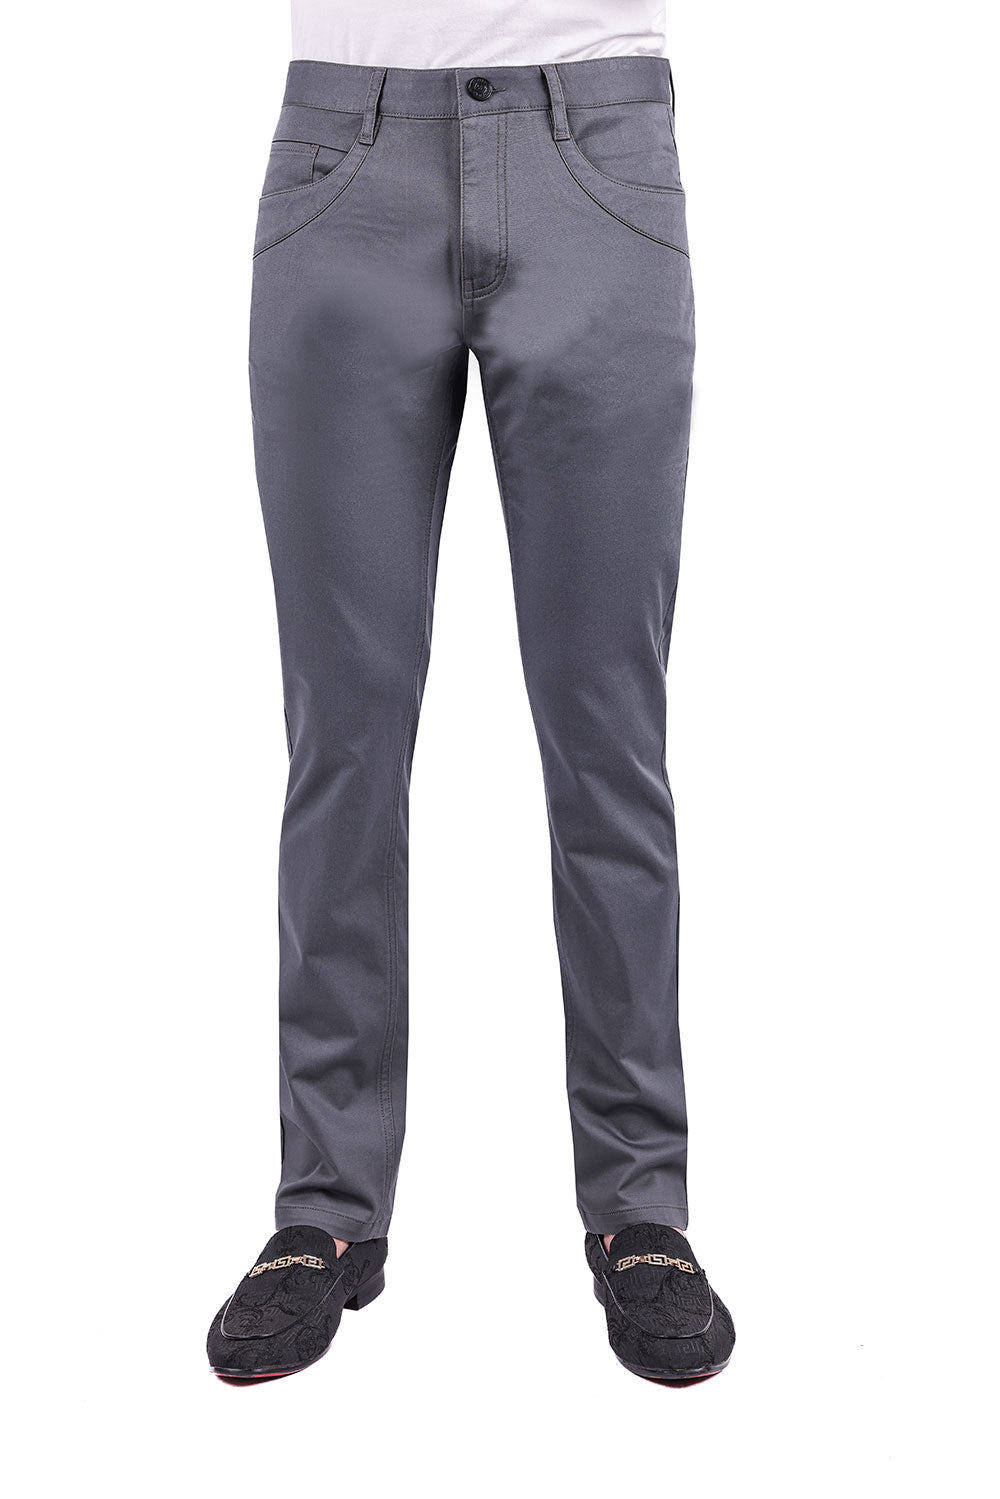 Barabas Men's Solid Color Basic Essential Chino Dress Pants 3CPW31 Charcoal